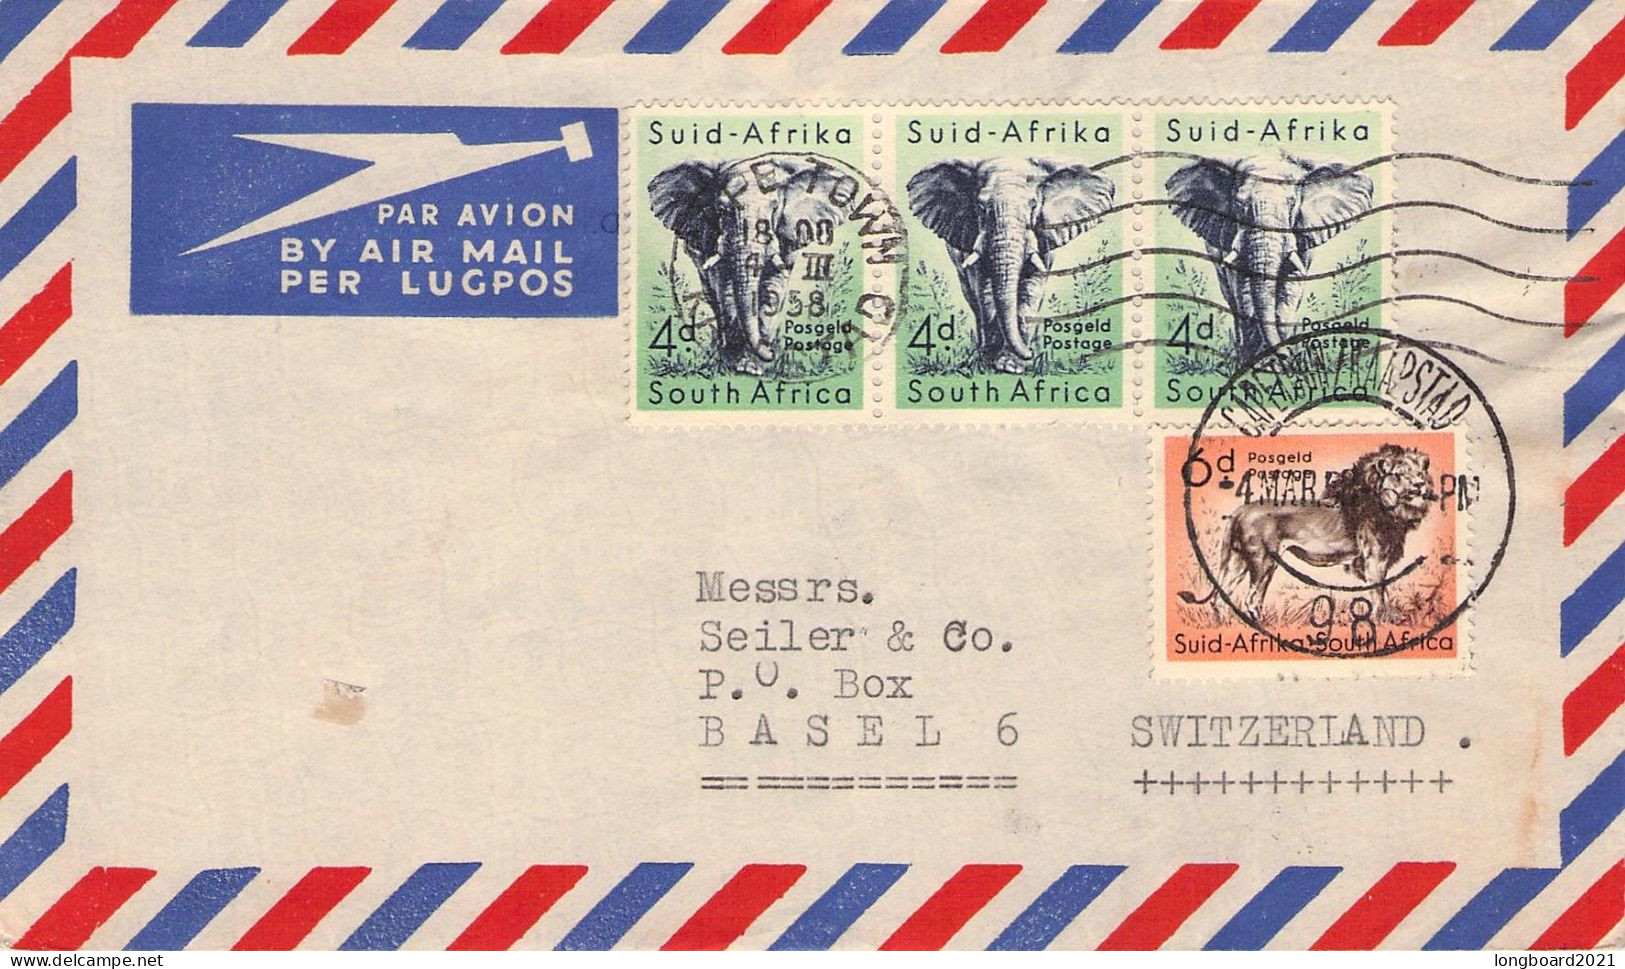 SOUTH AFRICA - MAIL 1958 CAPE TOWN - BASEL/CH / 5246 - Luftpost